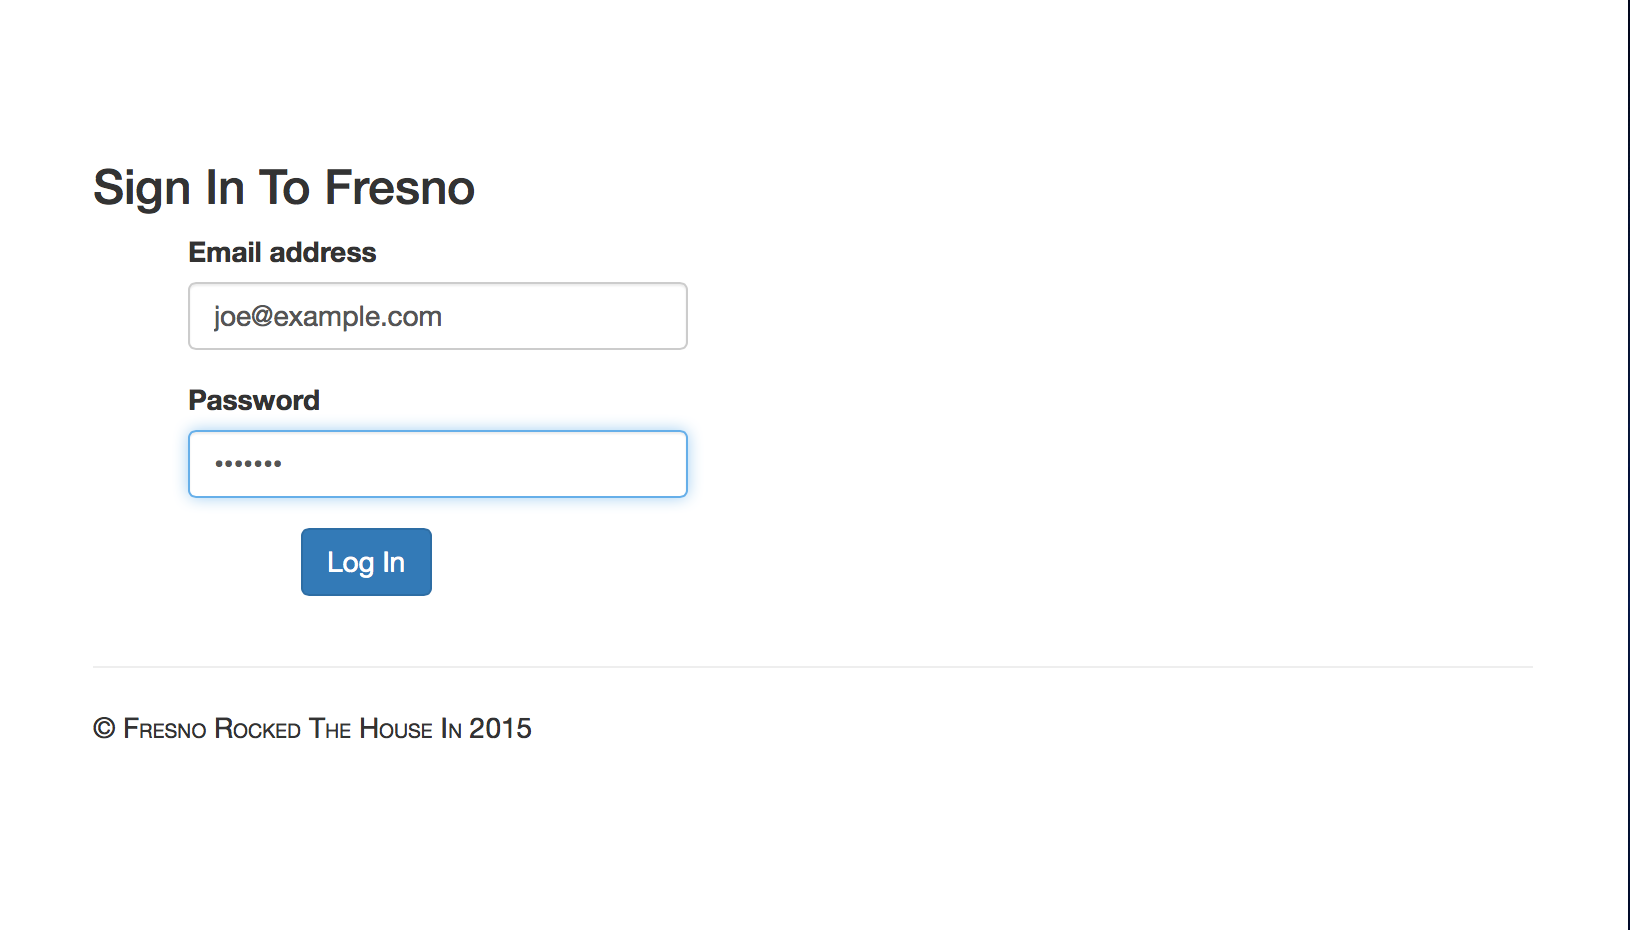 the signup page